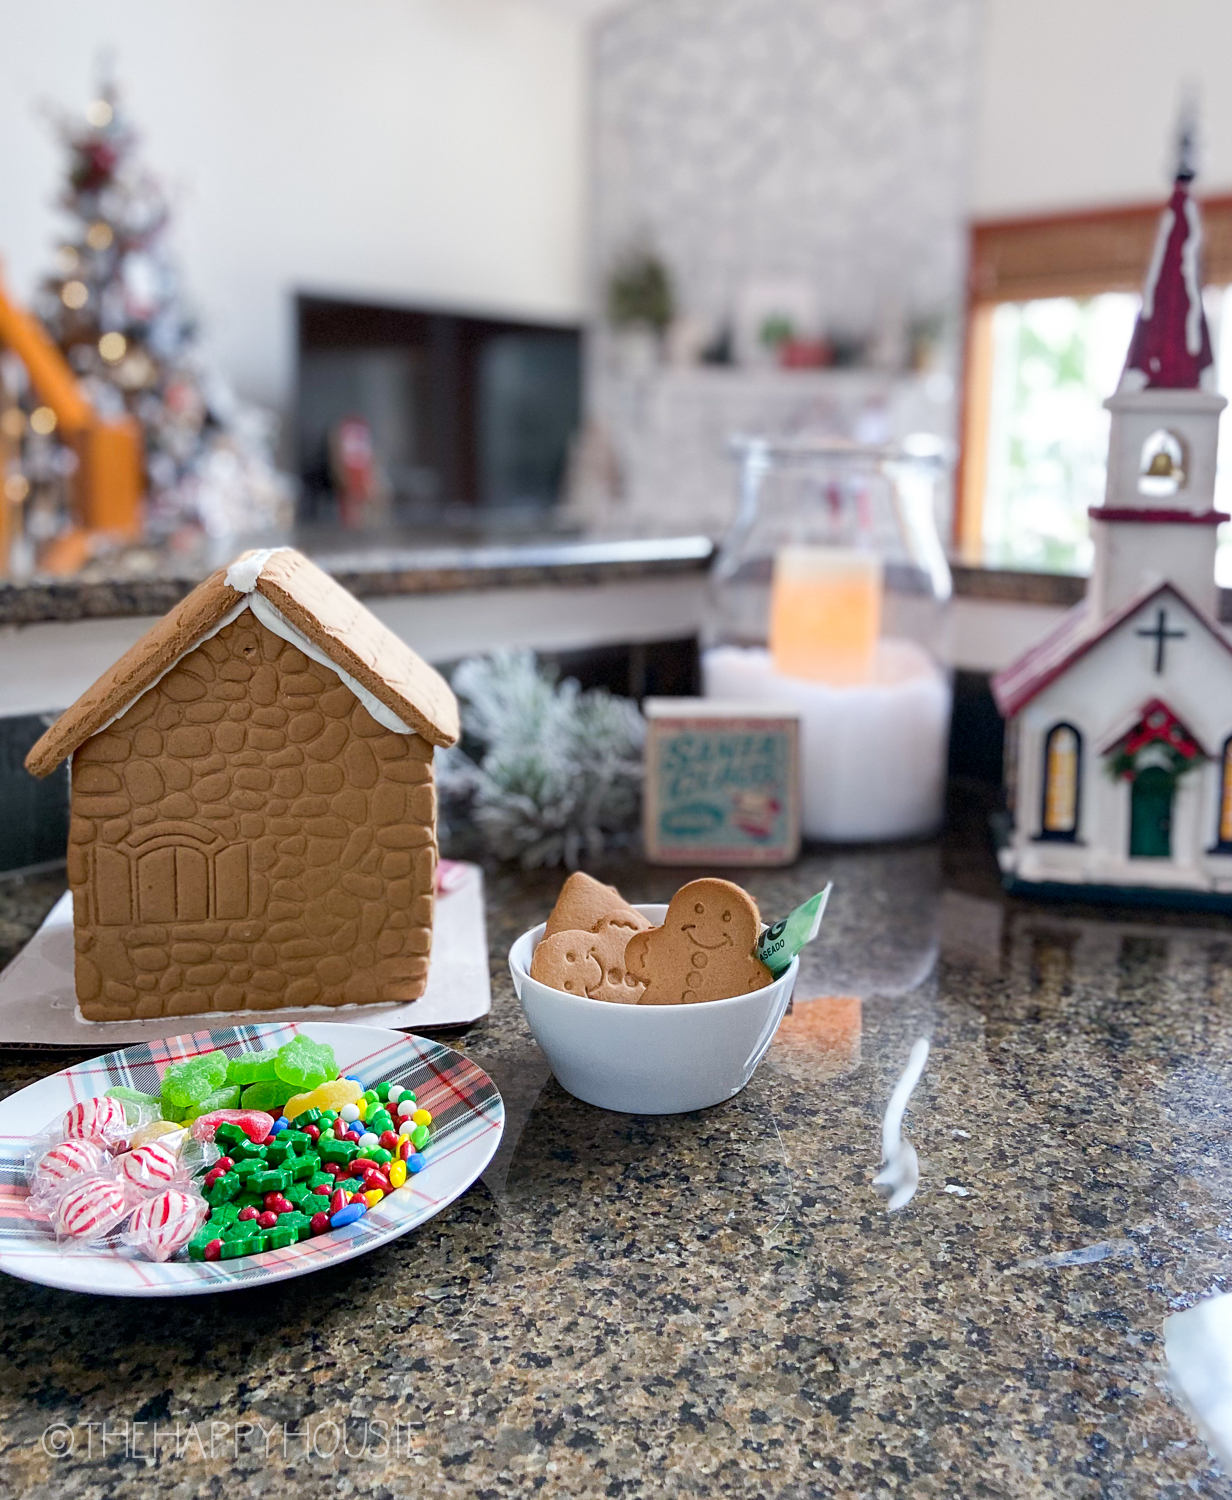 There is a gingerbread house and candy on the counter.